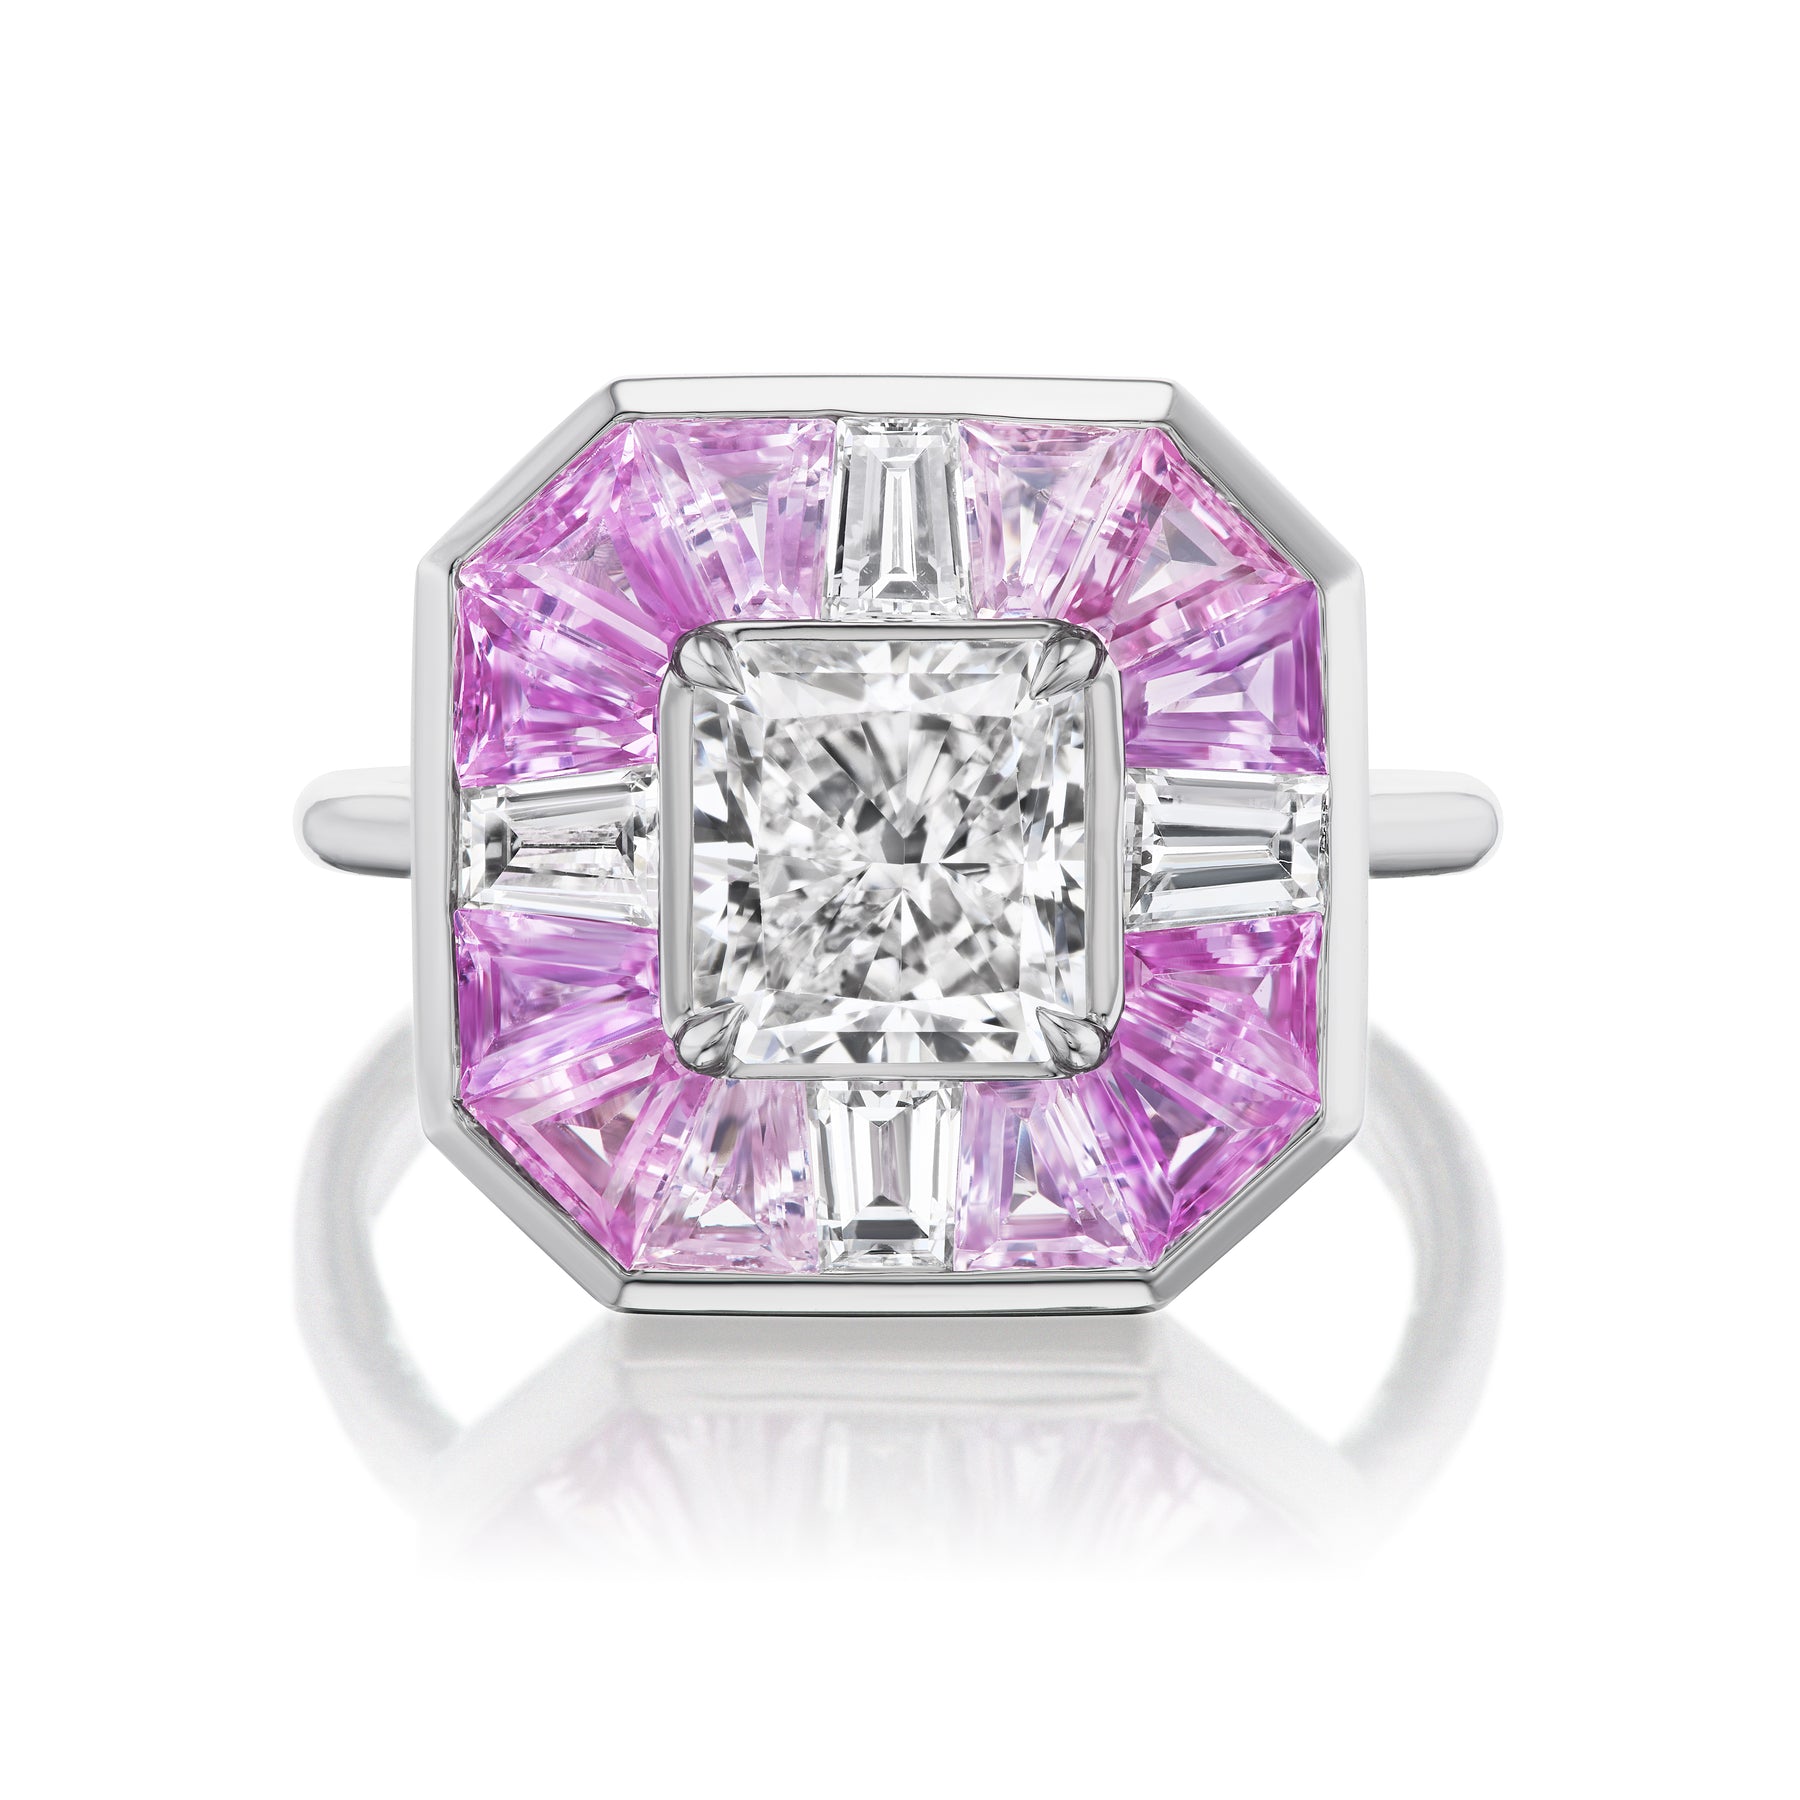 Mosaic Ring with Radiant Cut Diamond and Baguette Diamonds and Pink Sapphires